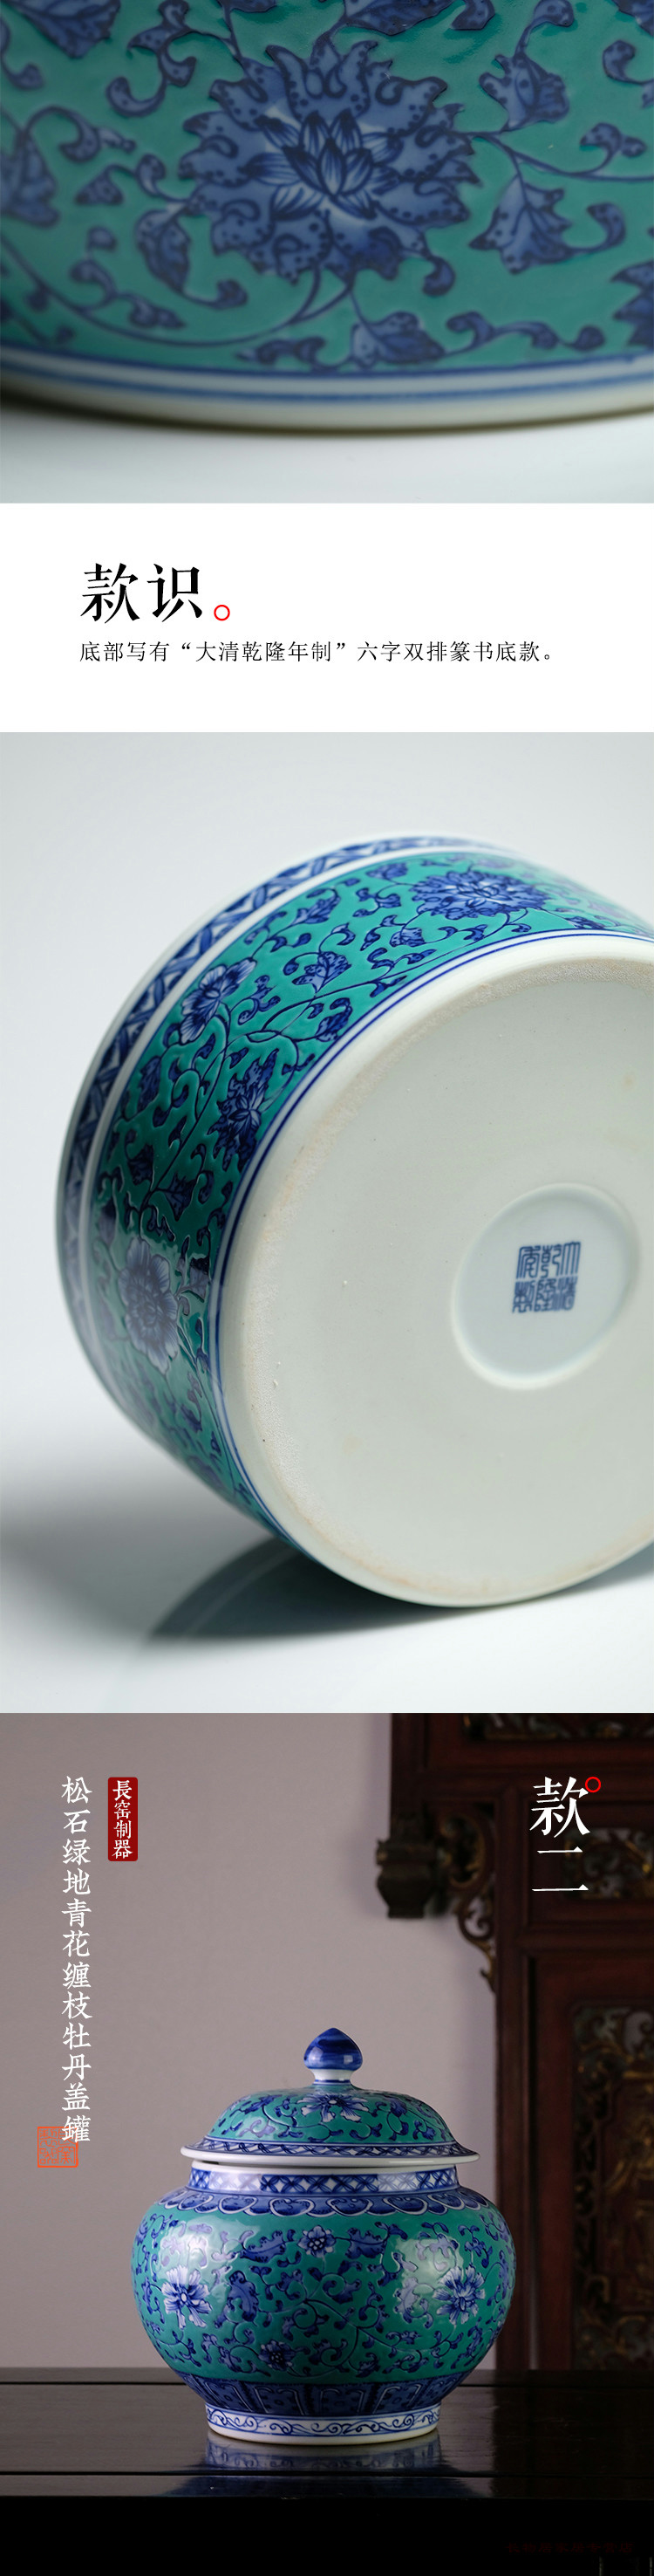 Long up controller offered home - cooked hoard of green space in blue and white tie up branches cover jingdezhen Chinese ceramic tea pot peony grains